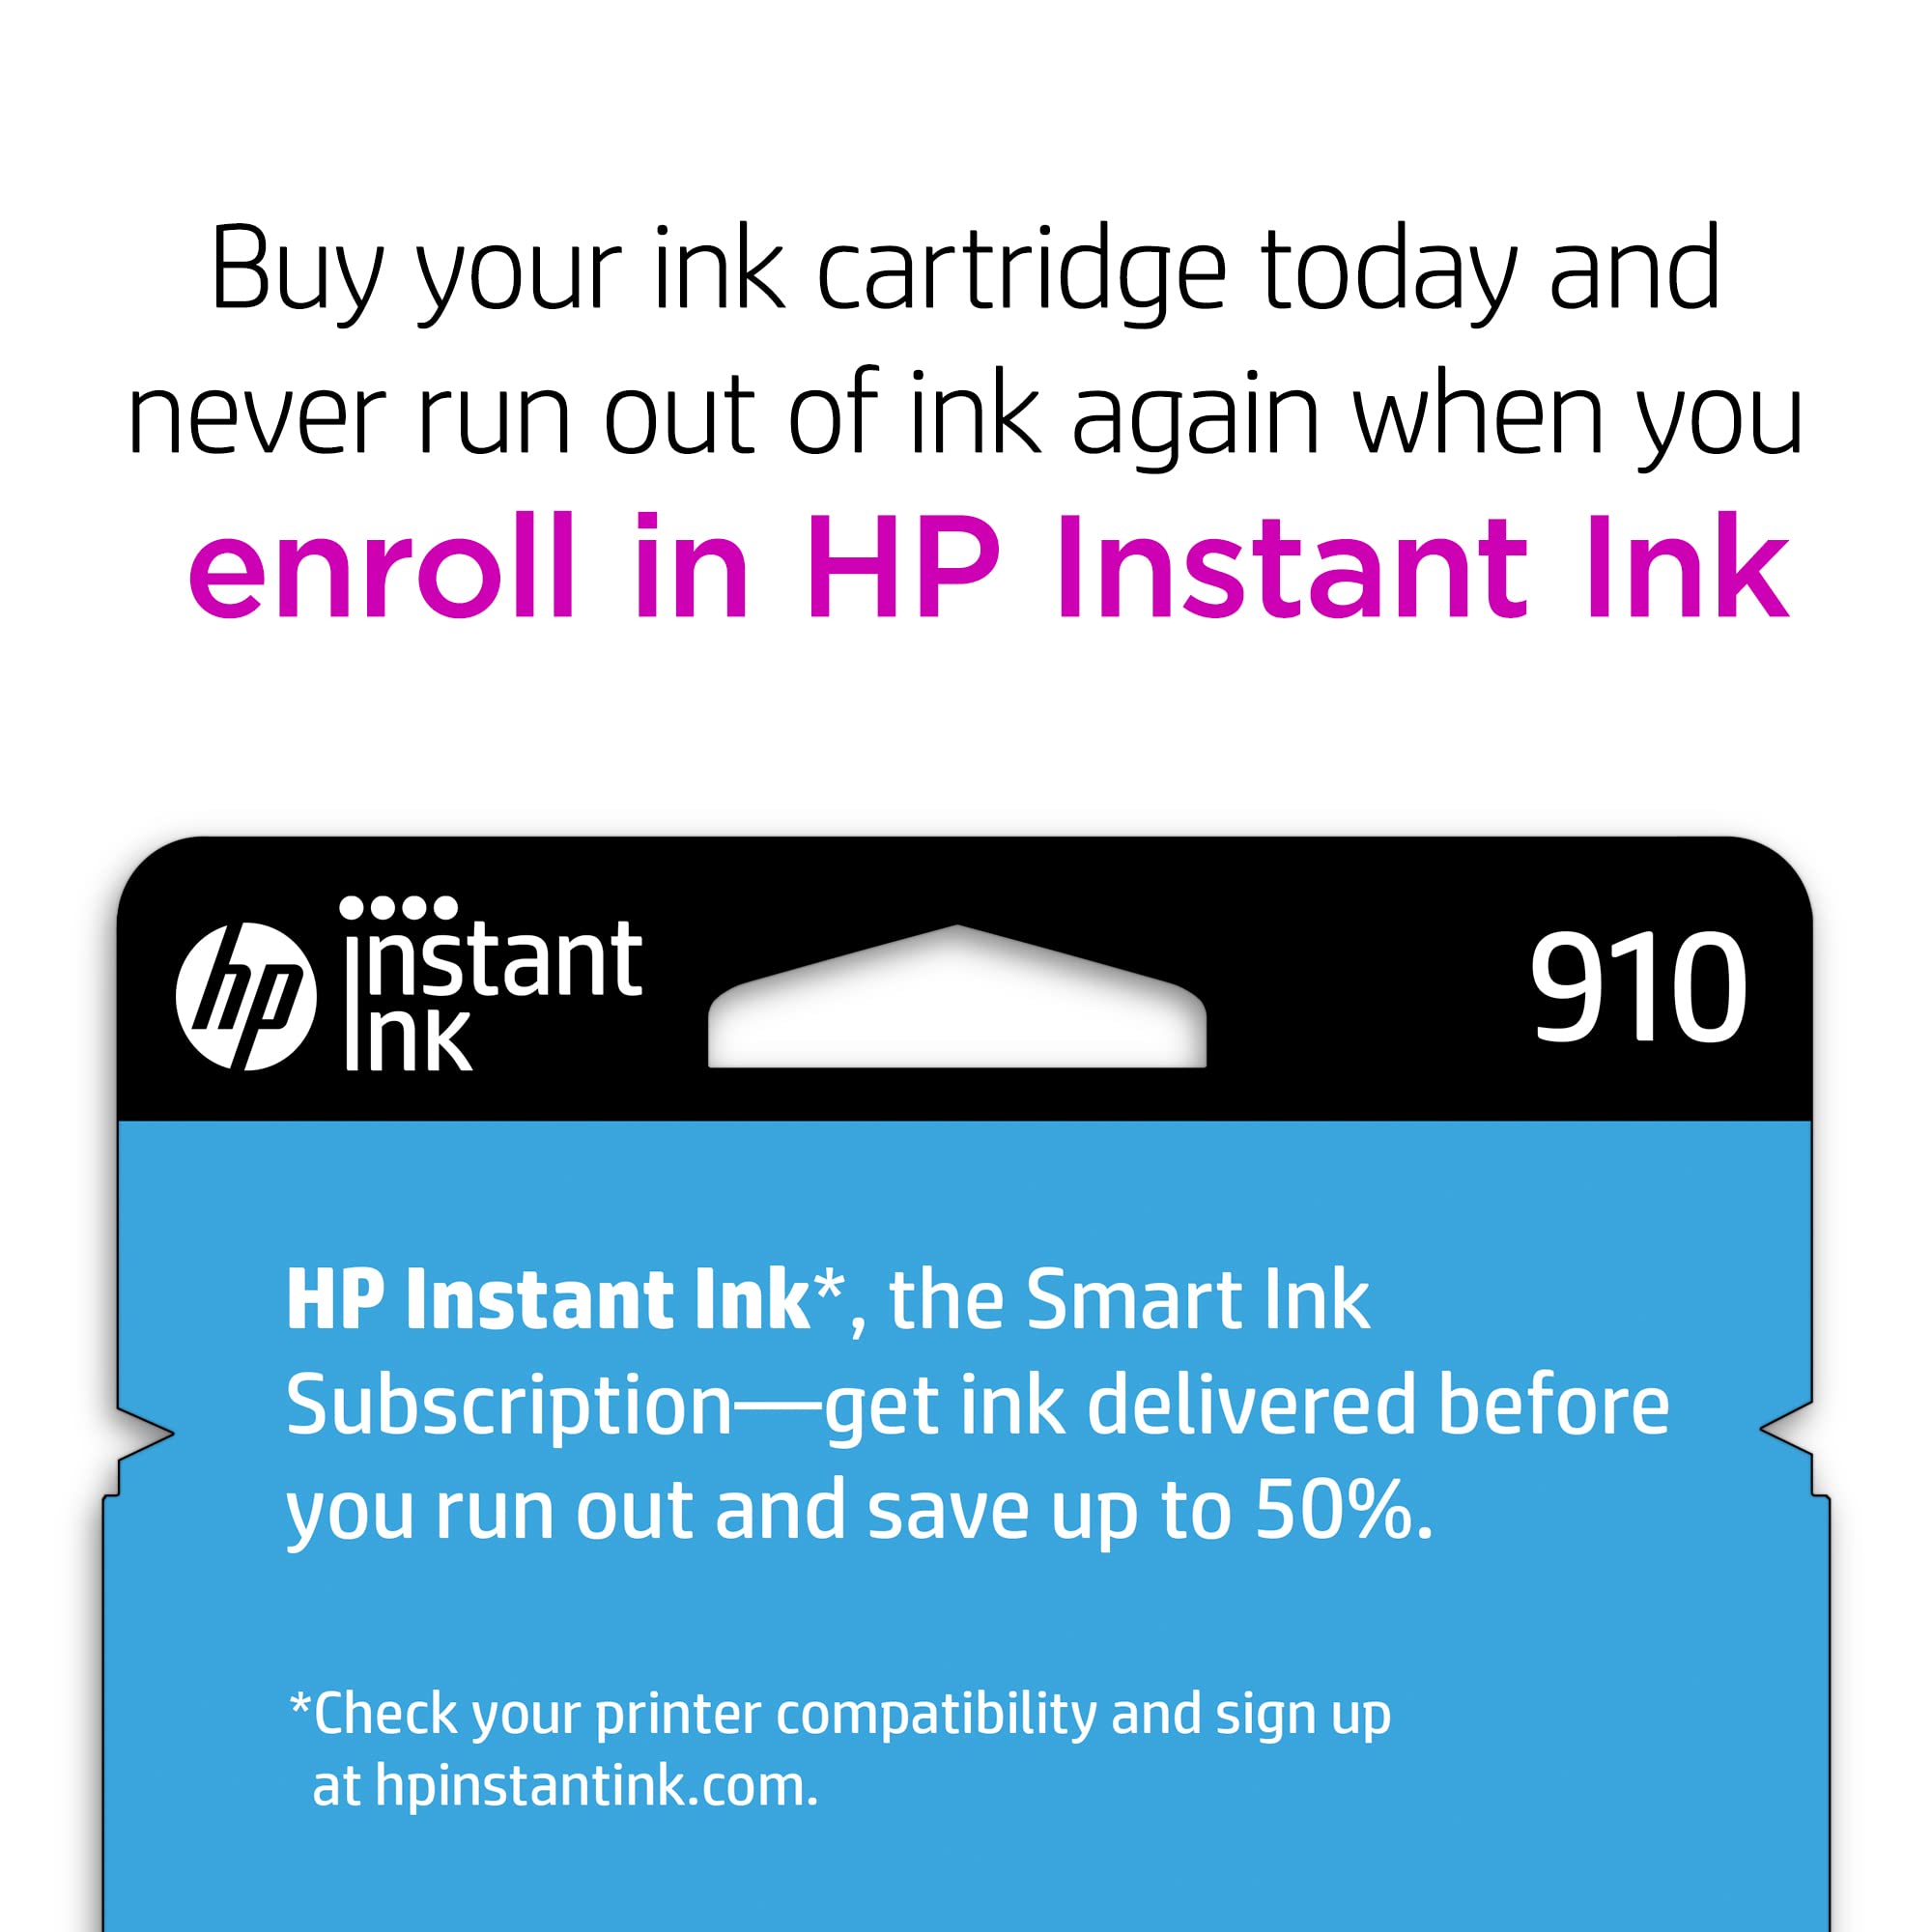 HP 910 Black Ink Cartridge | Works with HP OfficeJet 8010, 8020 Series, HP OfficeJet Pro 8020, 8030 Series | Eligible for Instant Ink | 3YL61AN